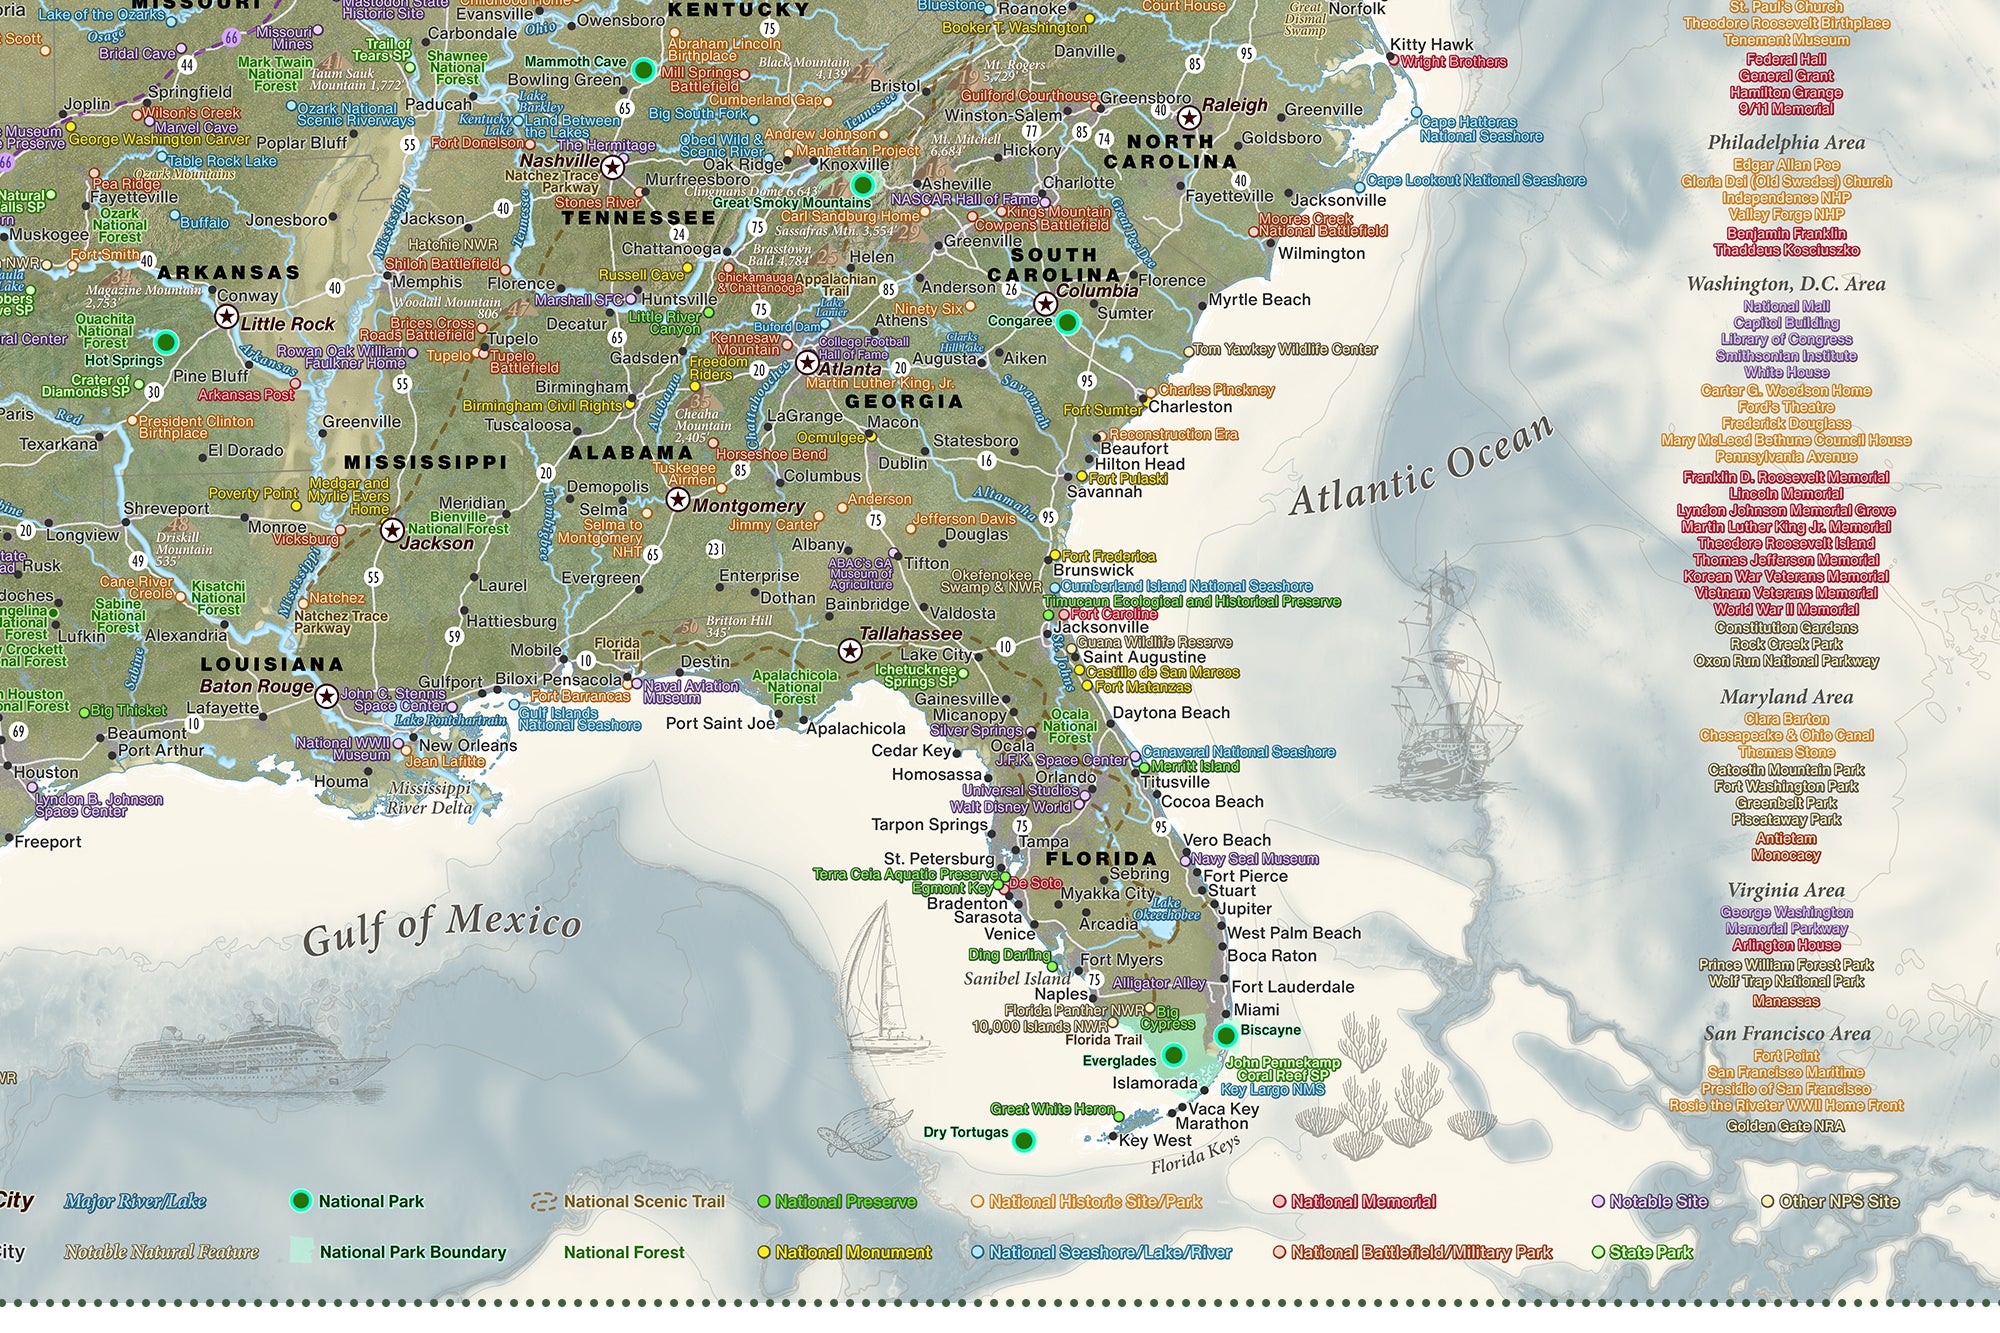 Detailed southern states